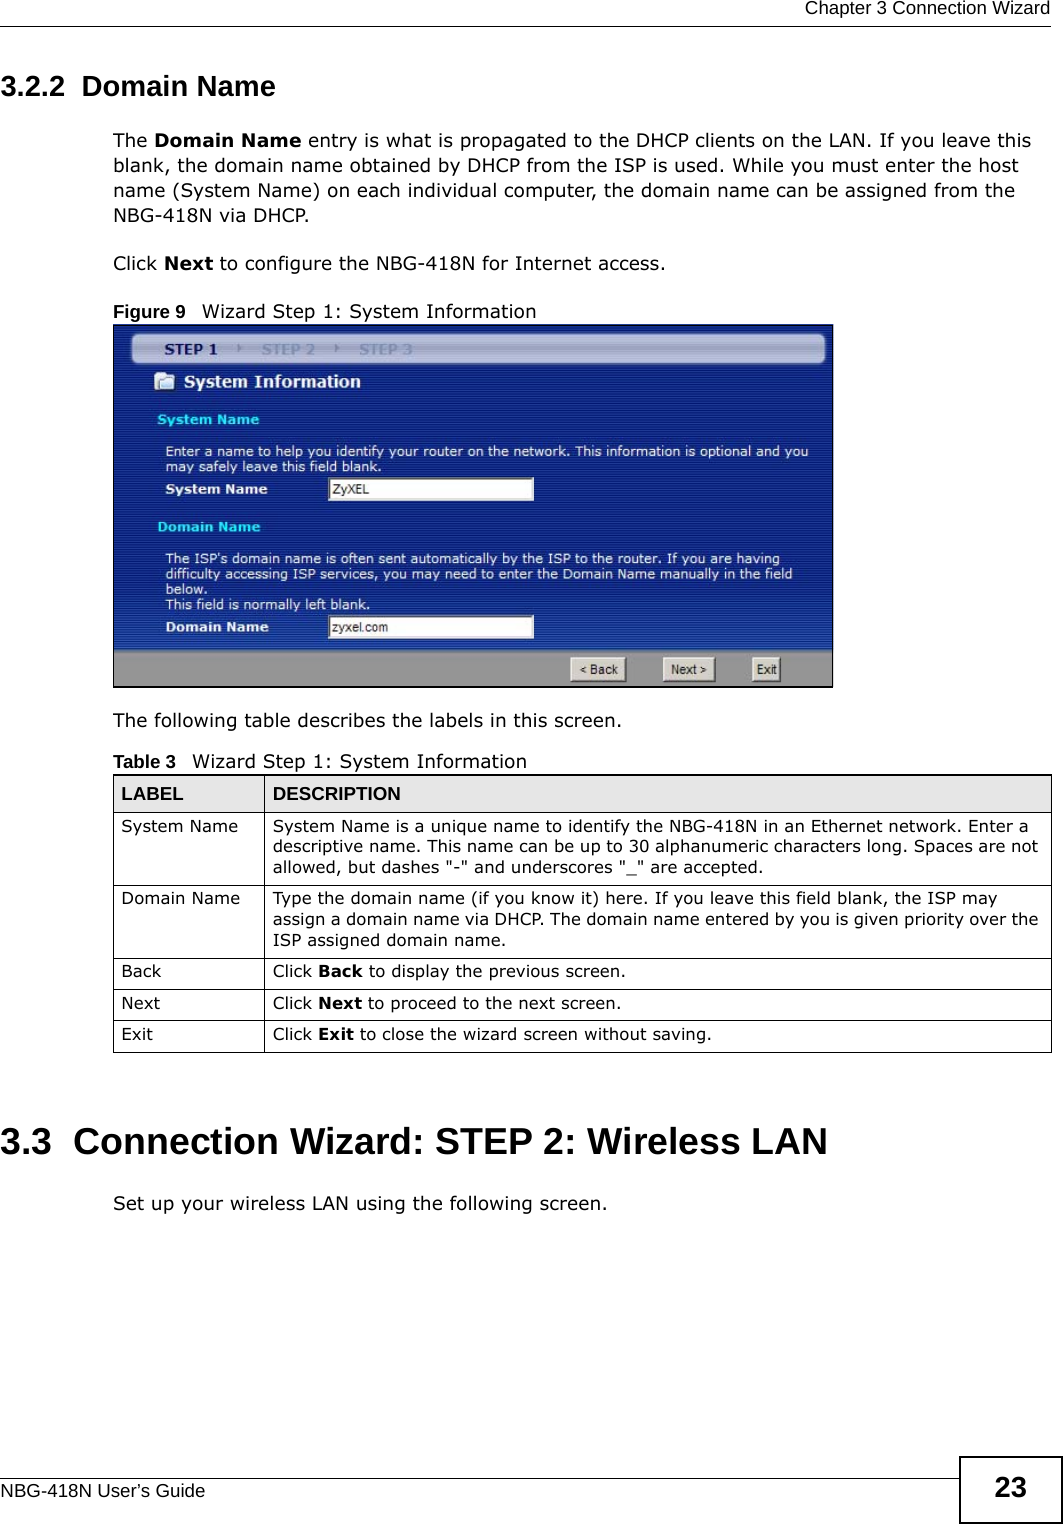  Chapter 3 Connection WizardNBG-418N User’s Guide 233.2.2  Domain NameThe Domain Name entry is what is propagated to the DHCP clients on the LAN. If you leave this blank, the domain name obtained by DHCP from the ISP is used. While you must enter the host name (System Name) on each individual computer, the domain name can be assigned from the NBG-418N via DHCP.Click Next to configure the NBG-418N for Internet access.Figure 9   Wizard Step 1: System InformationThe following table describes the labels in this screen.3.3  Connection Wizard: STEP 2: Wireless LANSet up your wireless LAN using the following screen.Table 3   Wizard Step 1: System InformationLABEL DESCRIPTIONSystem Name System Name is a unique name to identify the NBG-418N in an Ethernet network. Enter a descriptive name. This name can be up to 30 alphanumeric characters long. Spaces are not allowed, but dashes &quot;-&quot; and underscores &quot;_&quot; are accepted. Domain Name Type the domain name (if you know it) here. If you leave this field blank, the ISP may assign a domain name via DHCP. The domain name entered by you is given priority over the ISP assigned domain name.Back Click Back to display the previous screen.Next Click Next to proceed to the next screen. Exit Click Exit to close the wizard screen without saving.